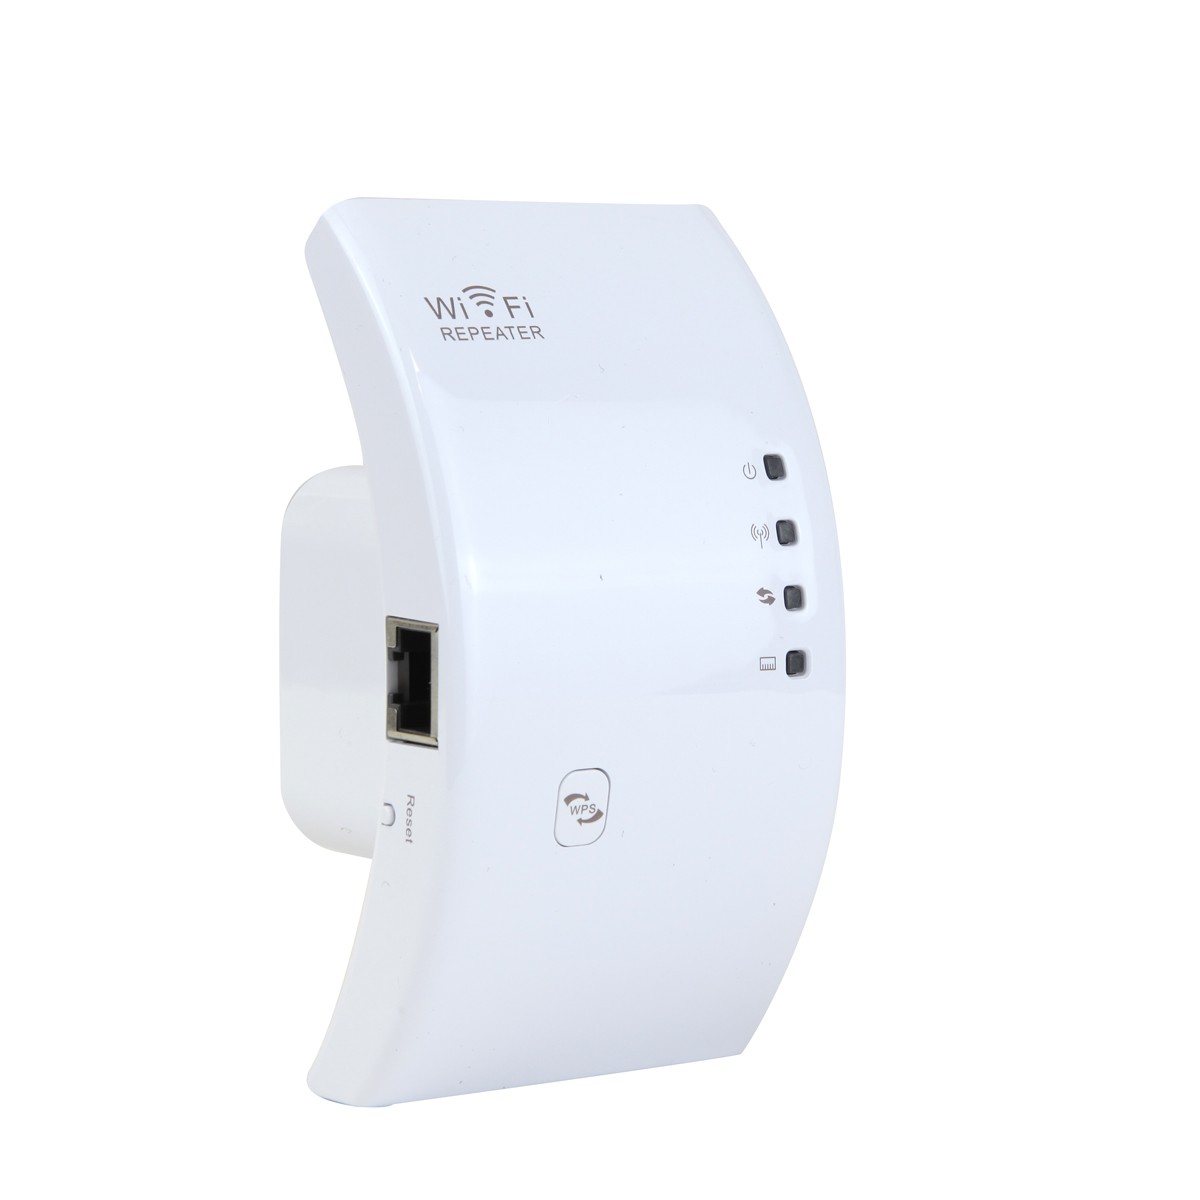 What are wireless access points used for?